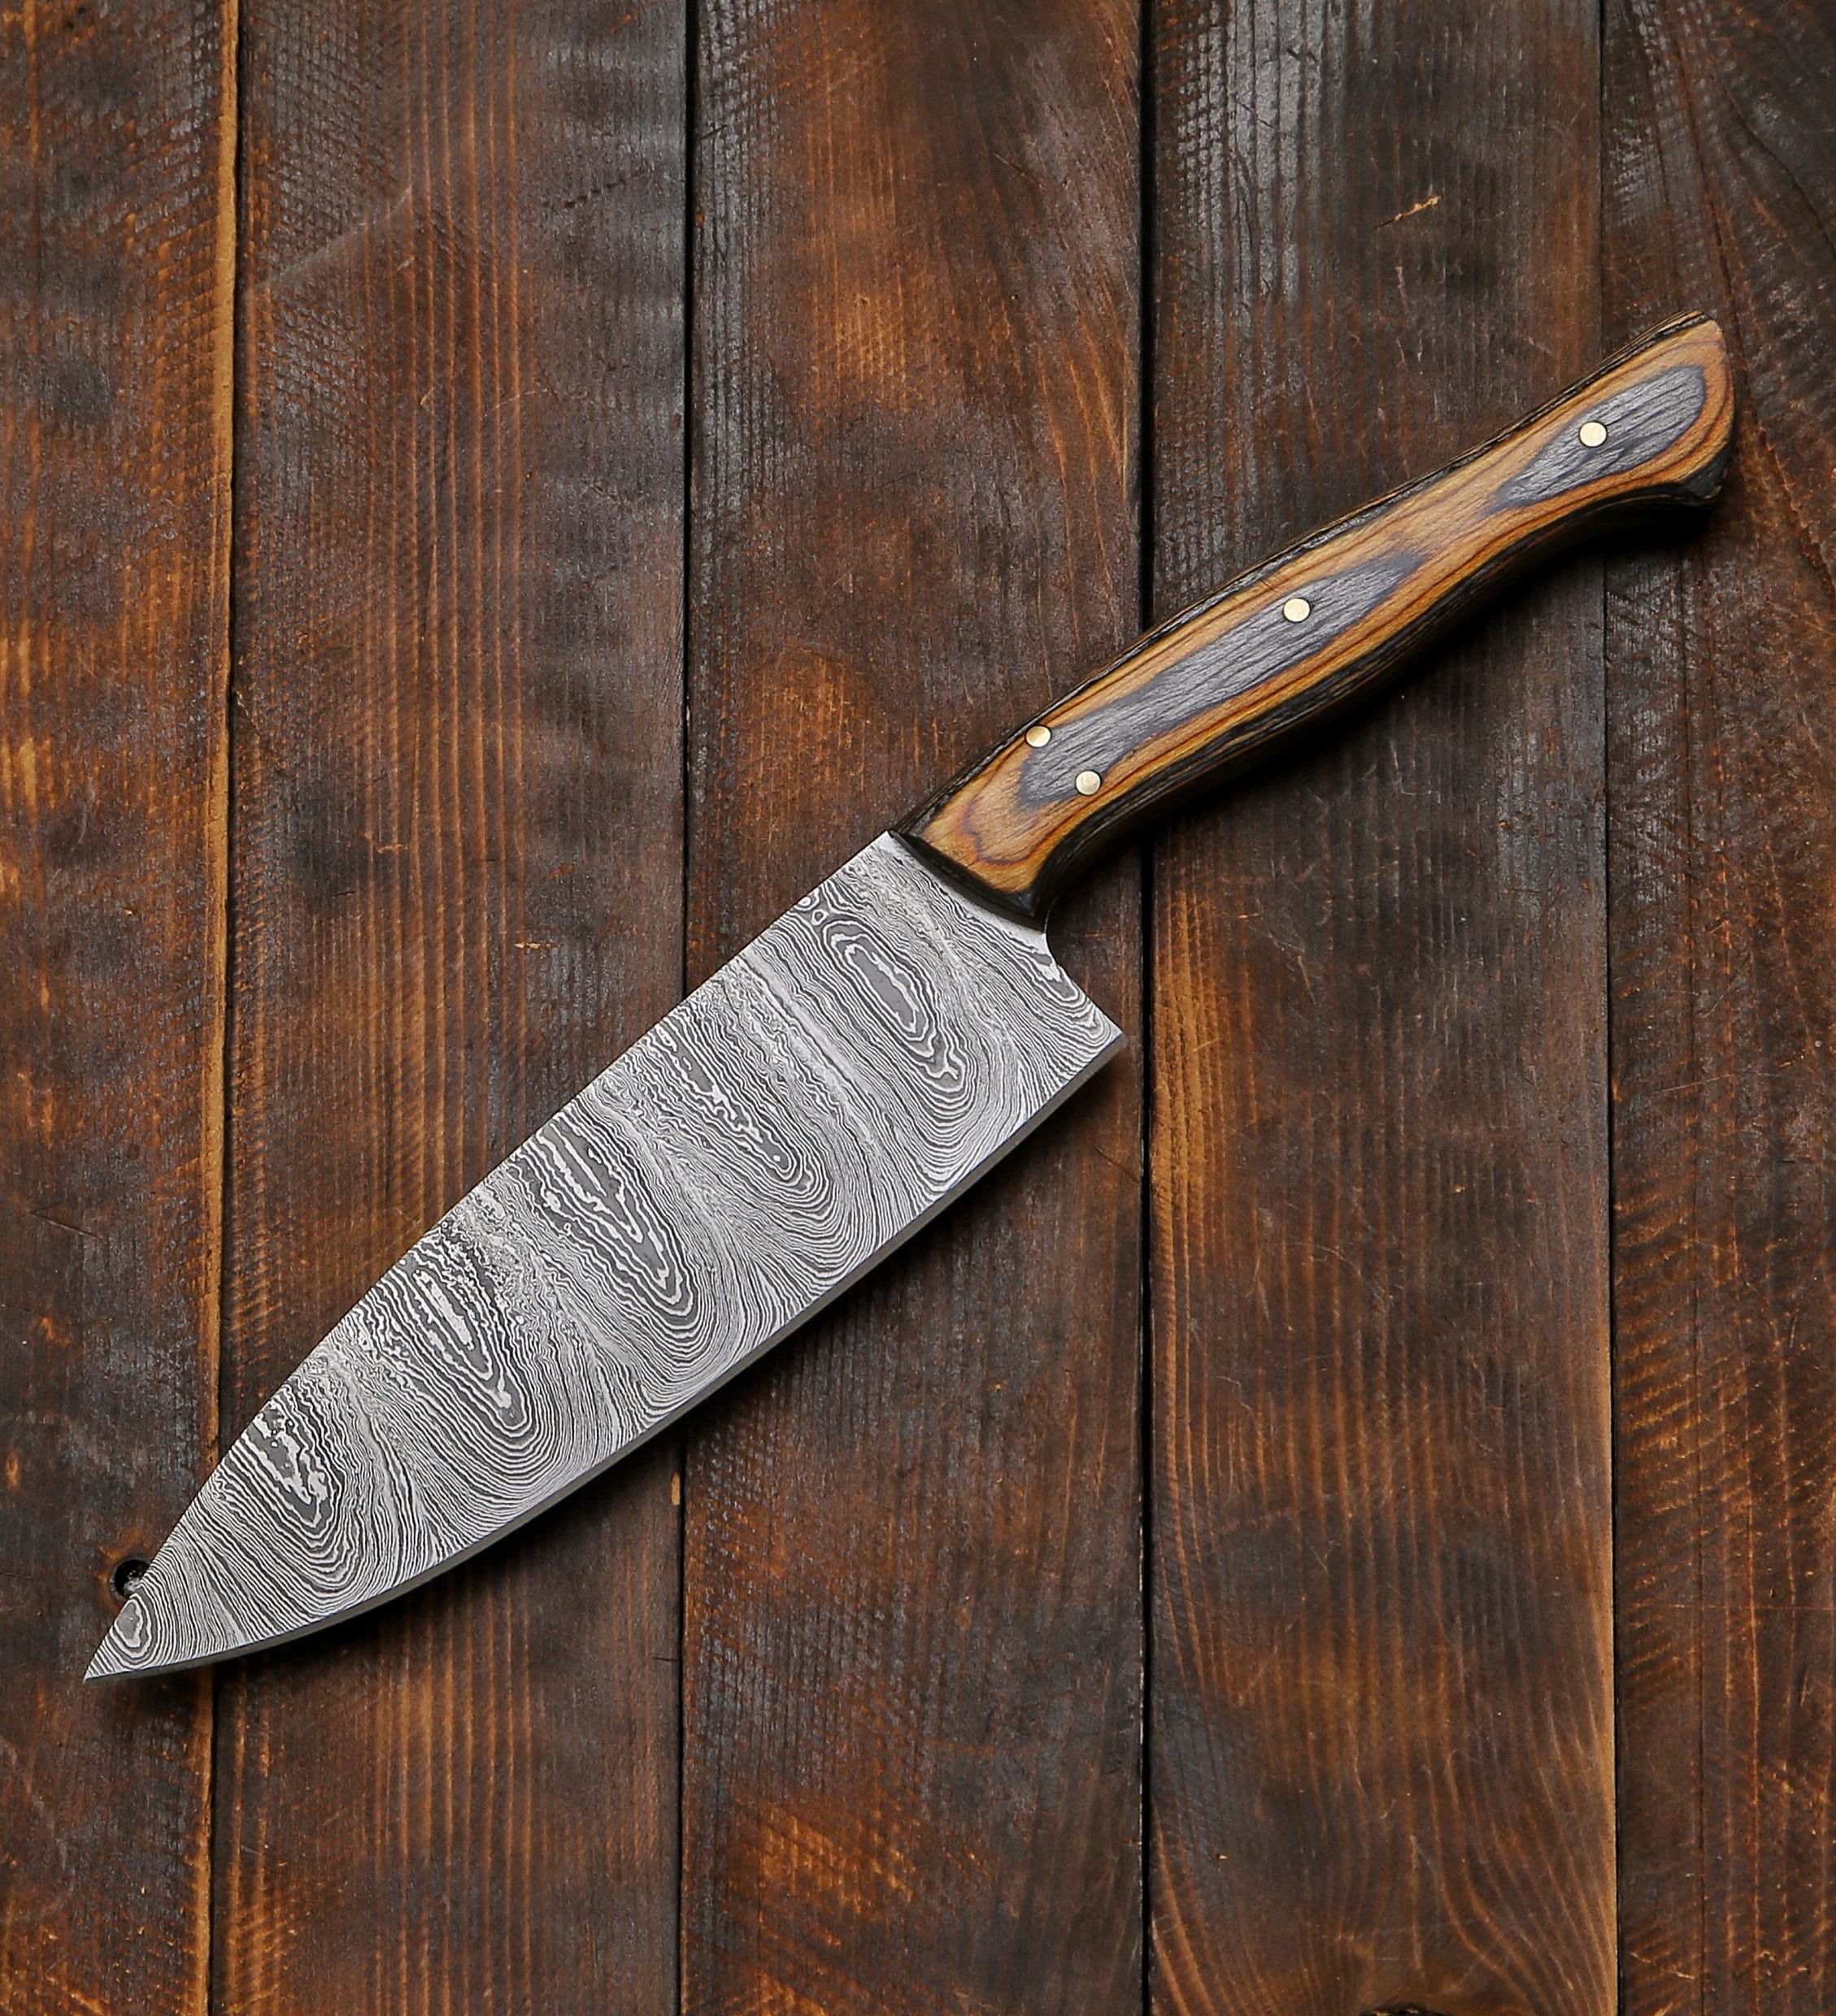 Viking Professional 8-Inch Chef's Knife – Viking Culinary Products